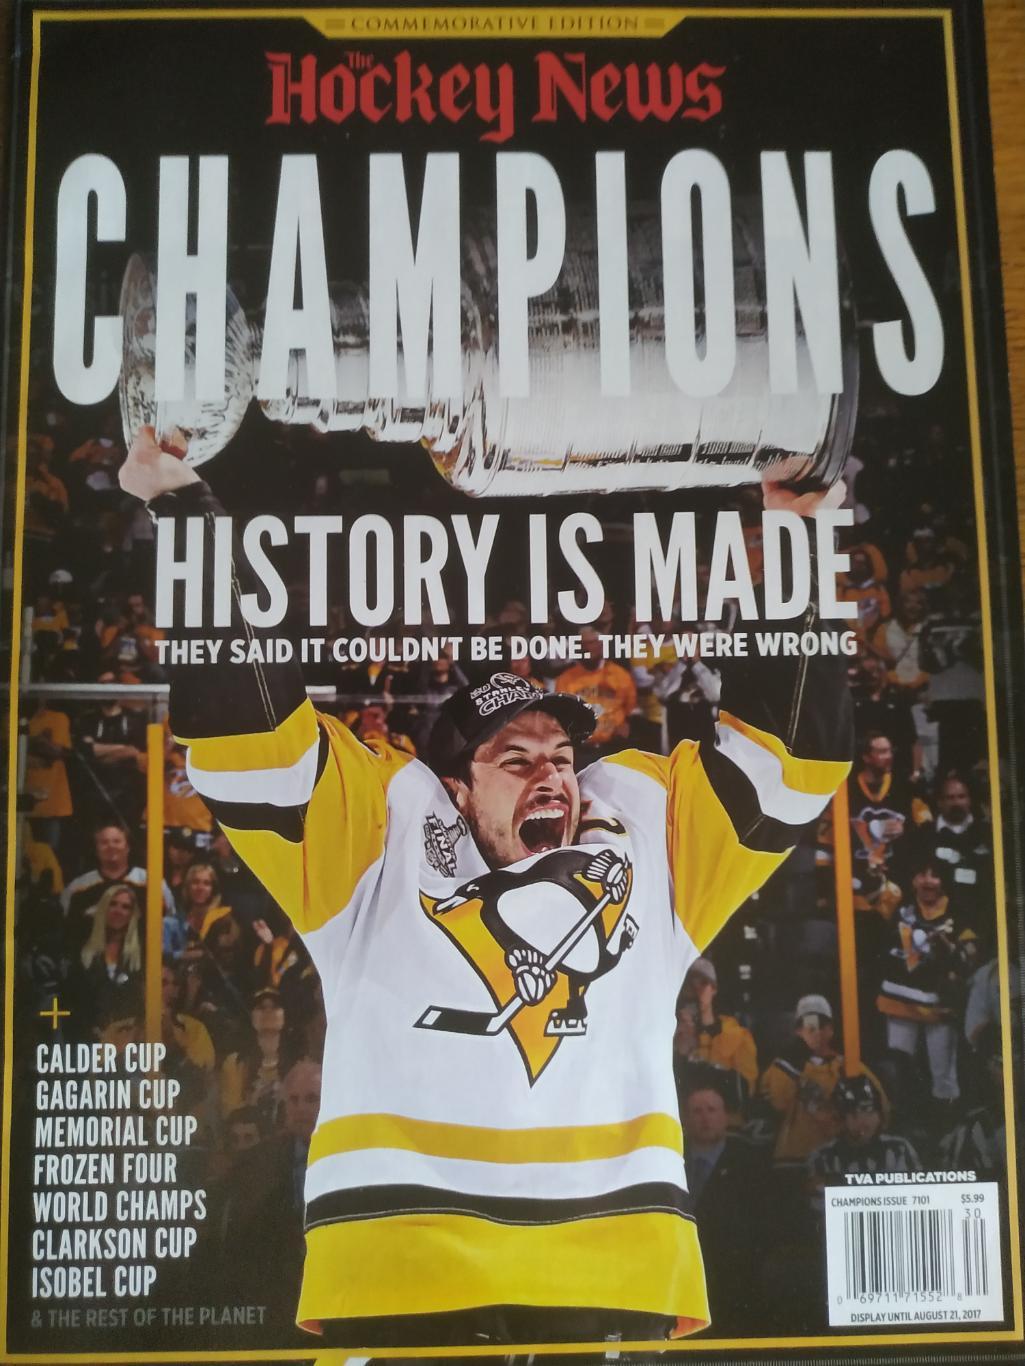 ЖУРНАЛ 2017 AUG 21 THE HOCKEY NEWS STANLEY CUP CHAMPIONS HISTORY IS MADE